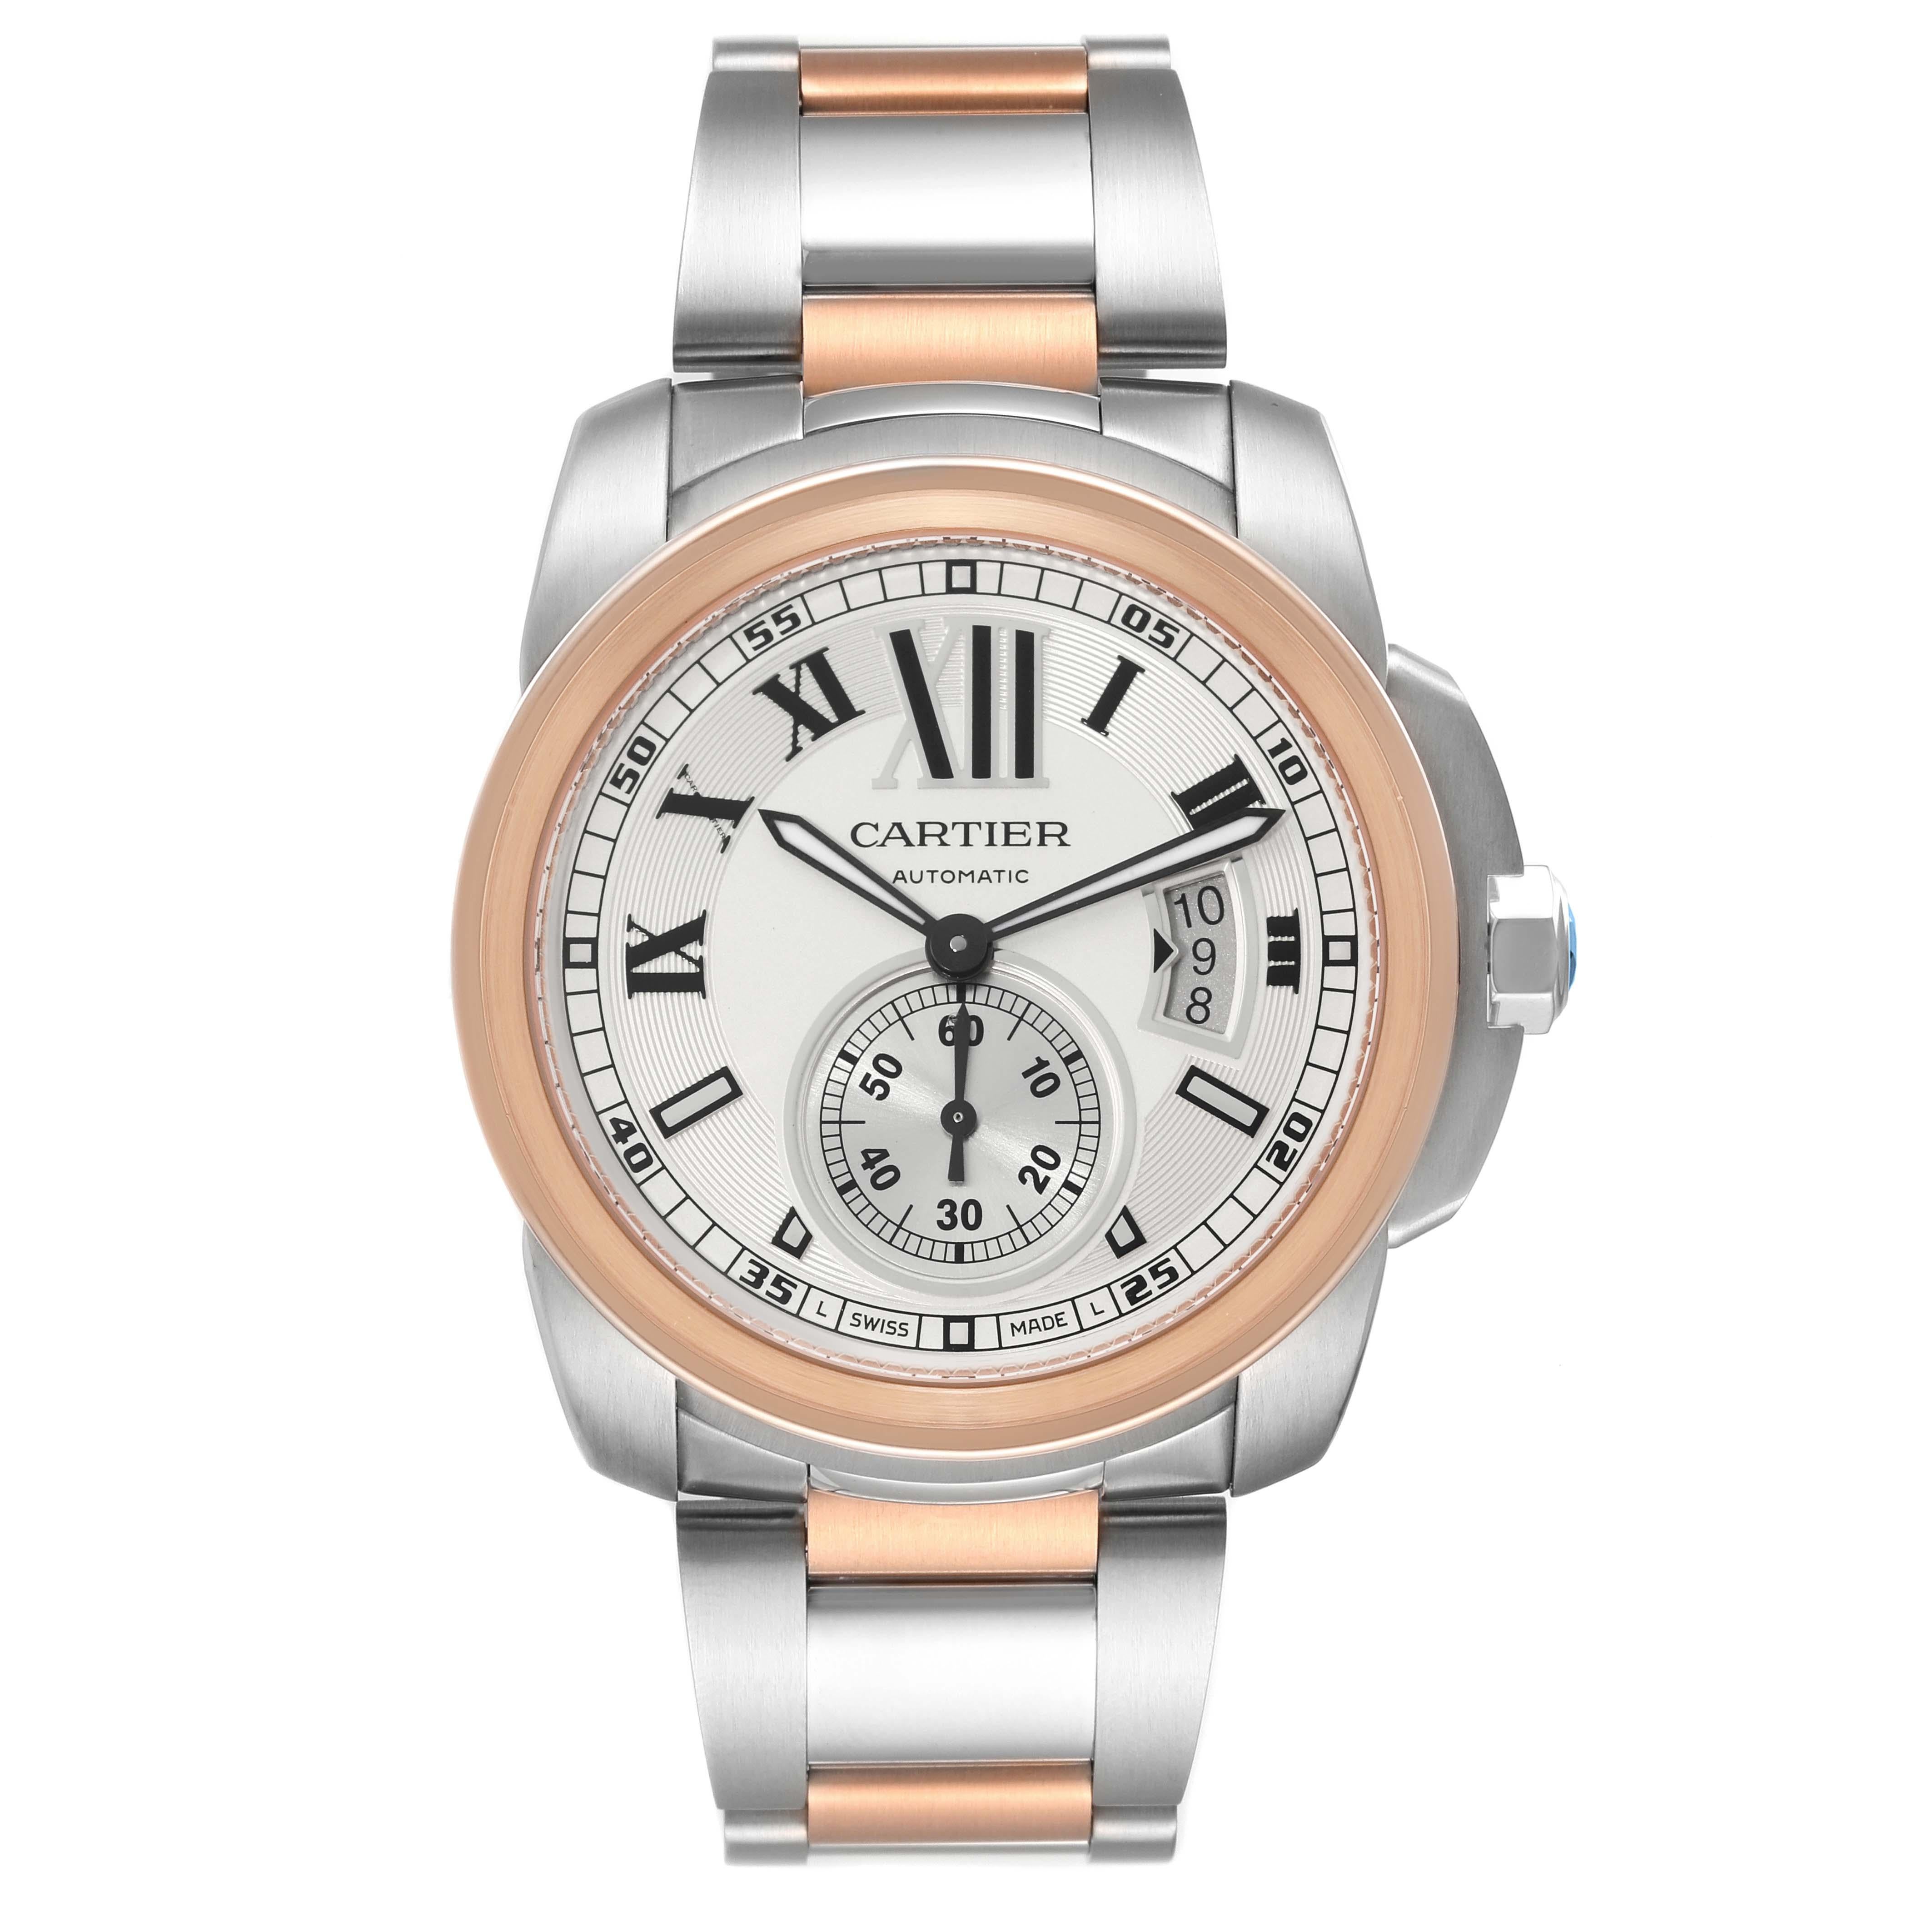 Cartier Calibre Diver Silver Dial Steel Rose Gold Mens Watch W7100036 Papers. Automatic self-winding movement. Stainless steel round case 42.0 mm in diameter. 18K rose gold crown set with faceted blue spinel. 18K rose gold bezel. Scratch resistant